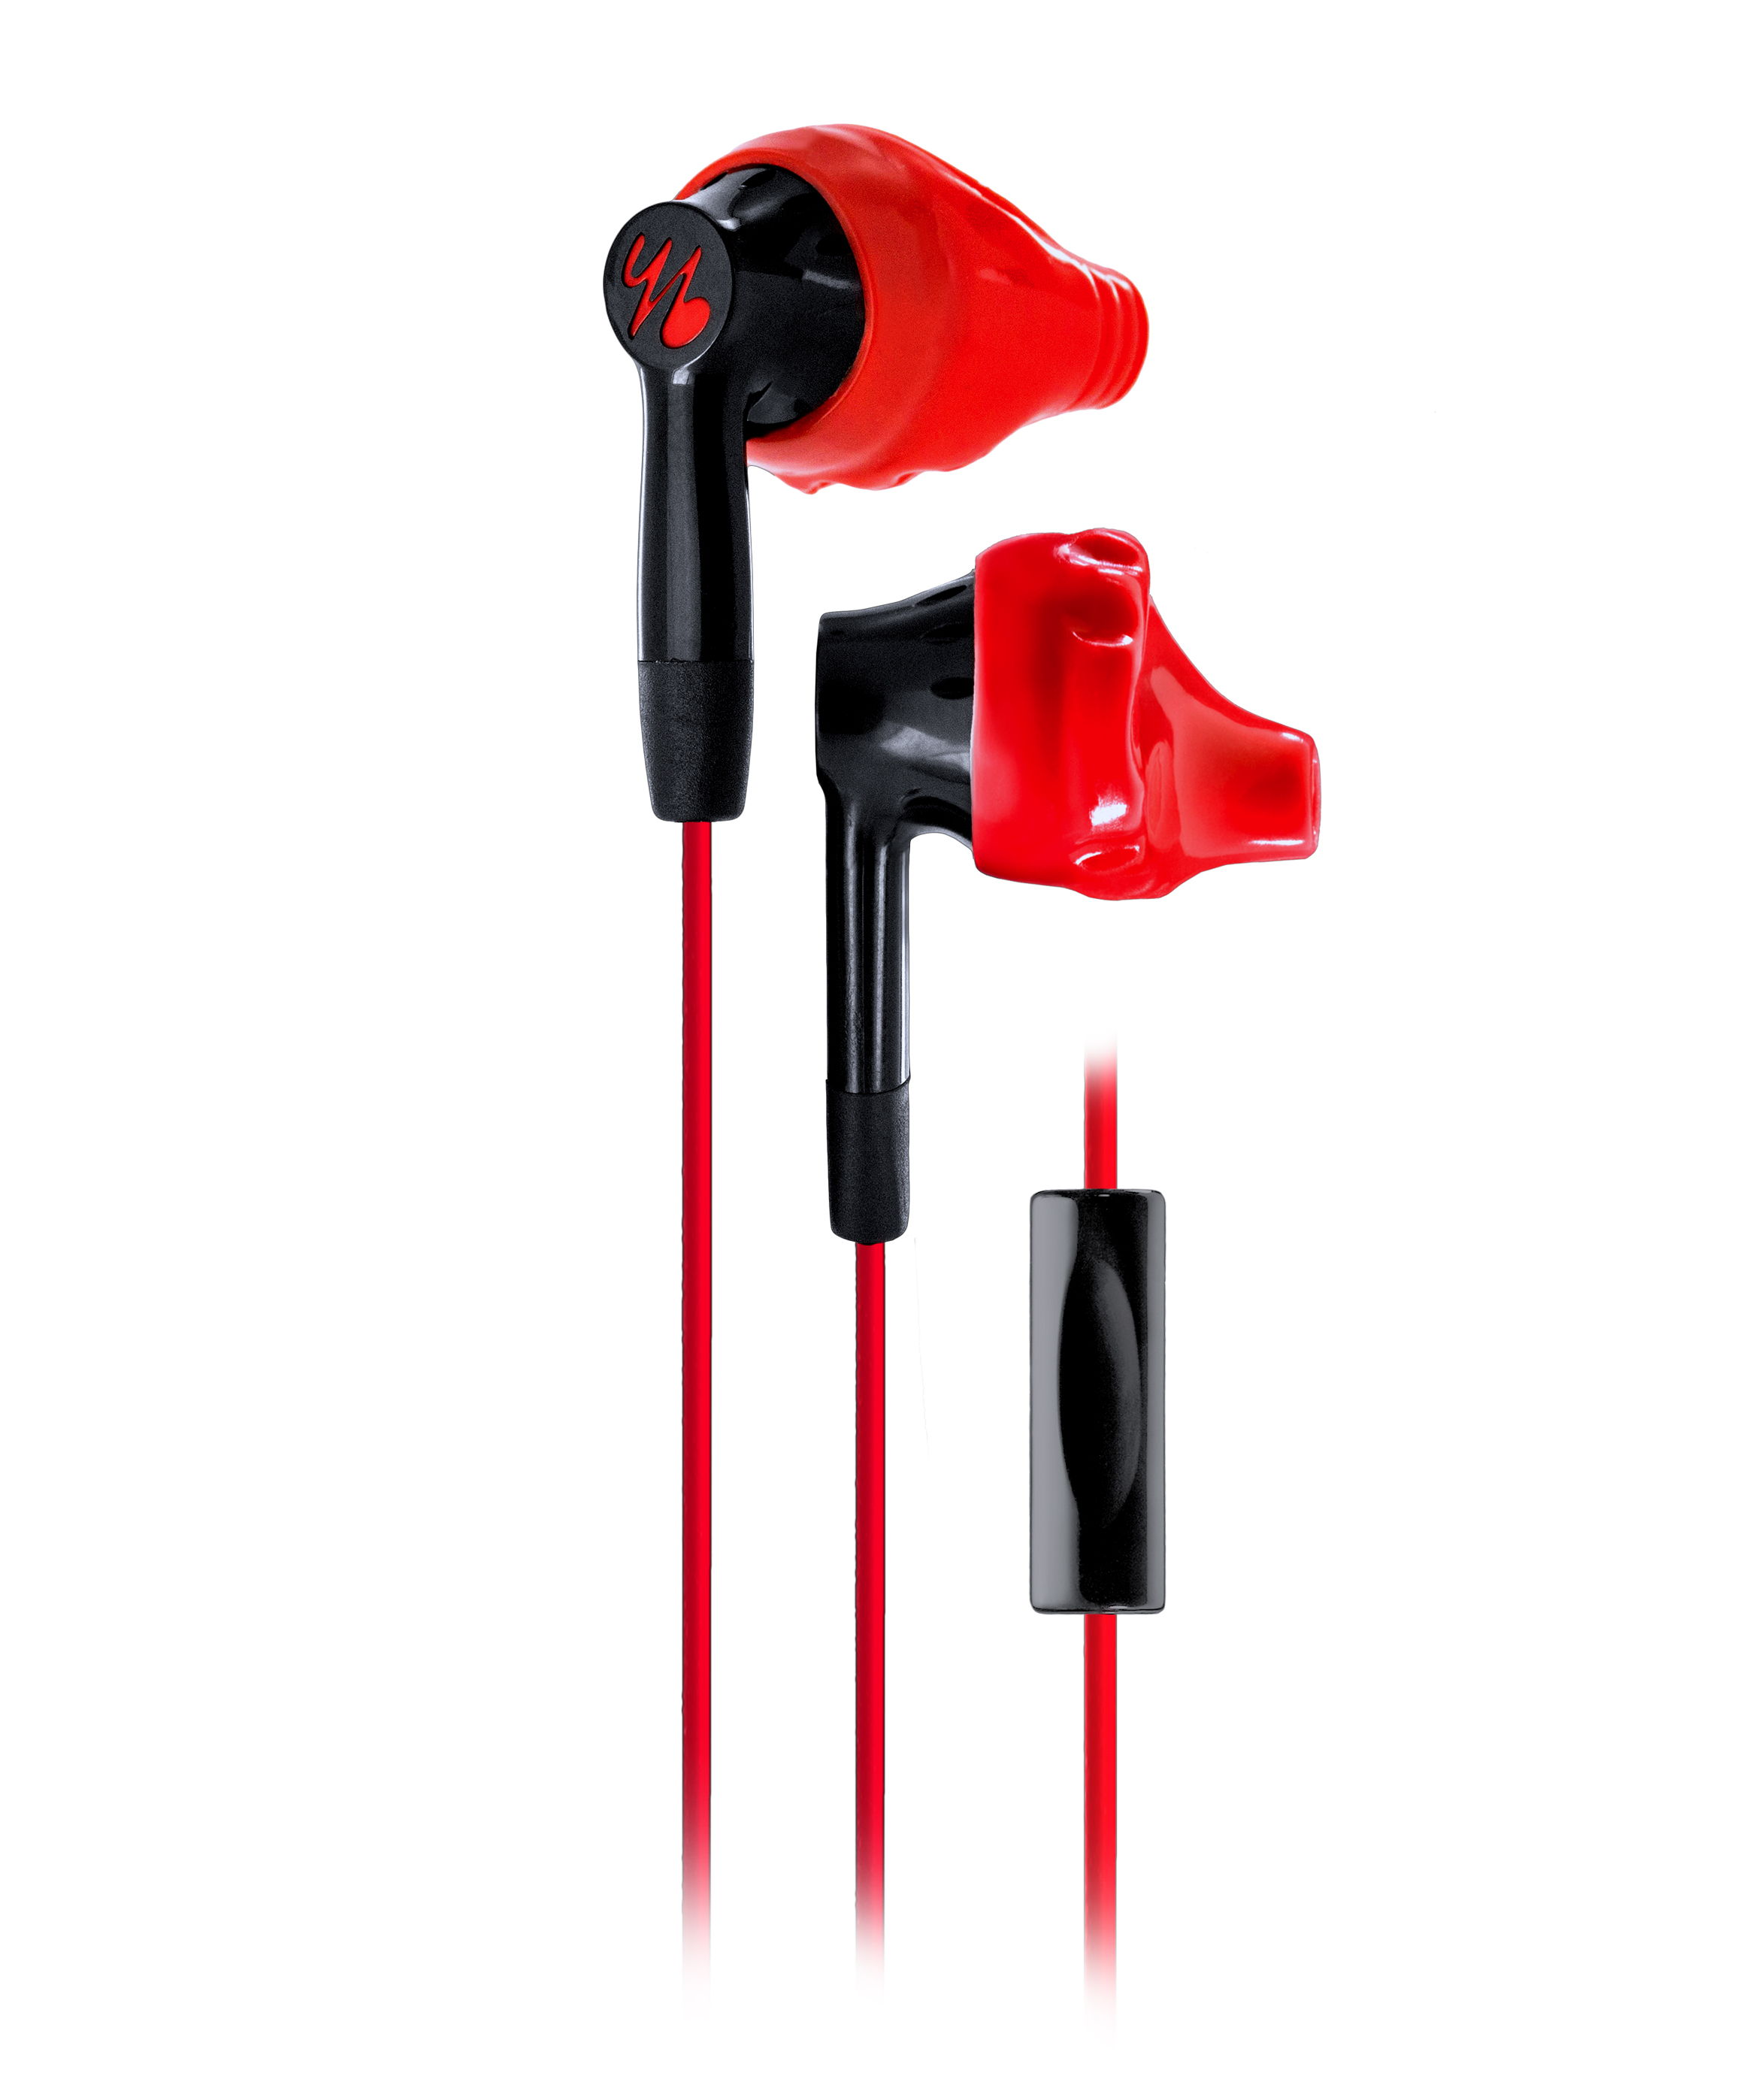 yurbuds® powered by JBL® Debuts New Earphones  Enhanced with JBL Signature Sound Exclusively at IFA 2014